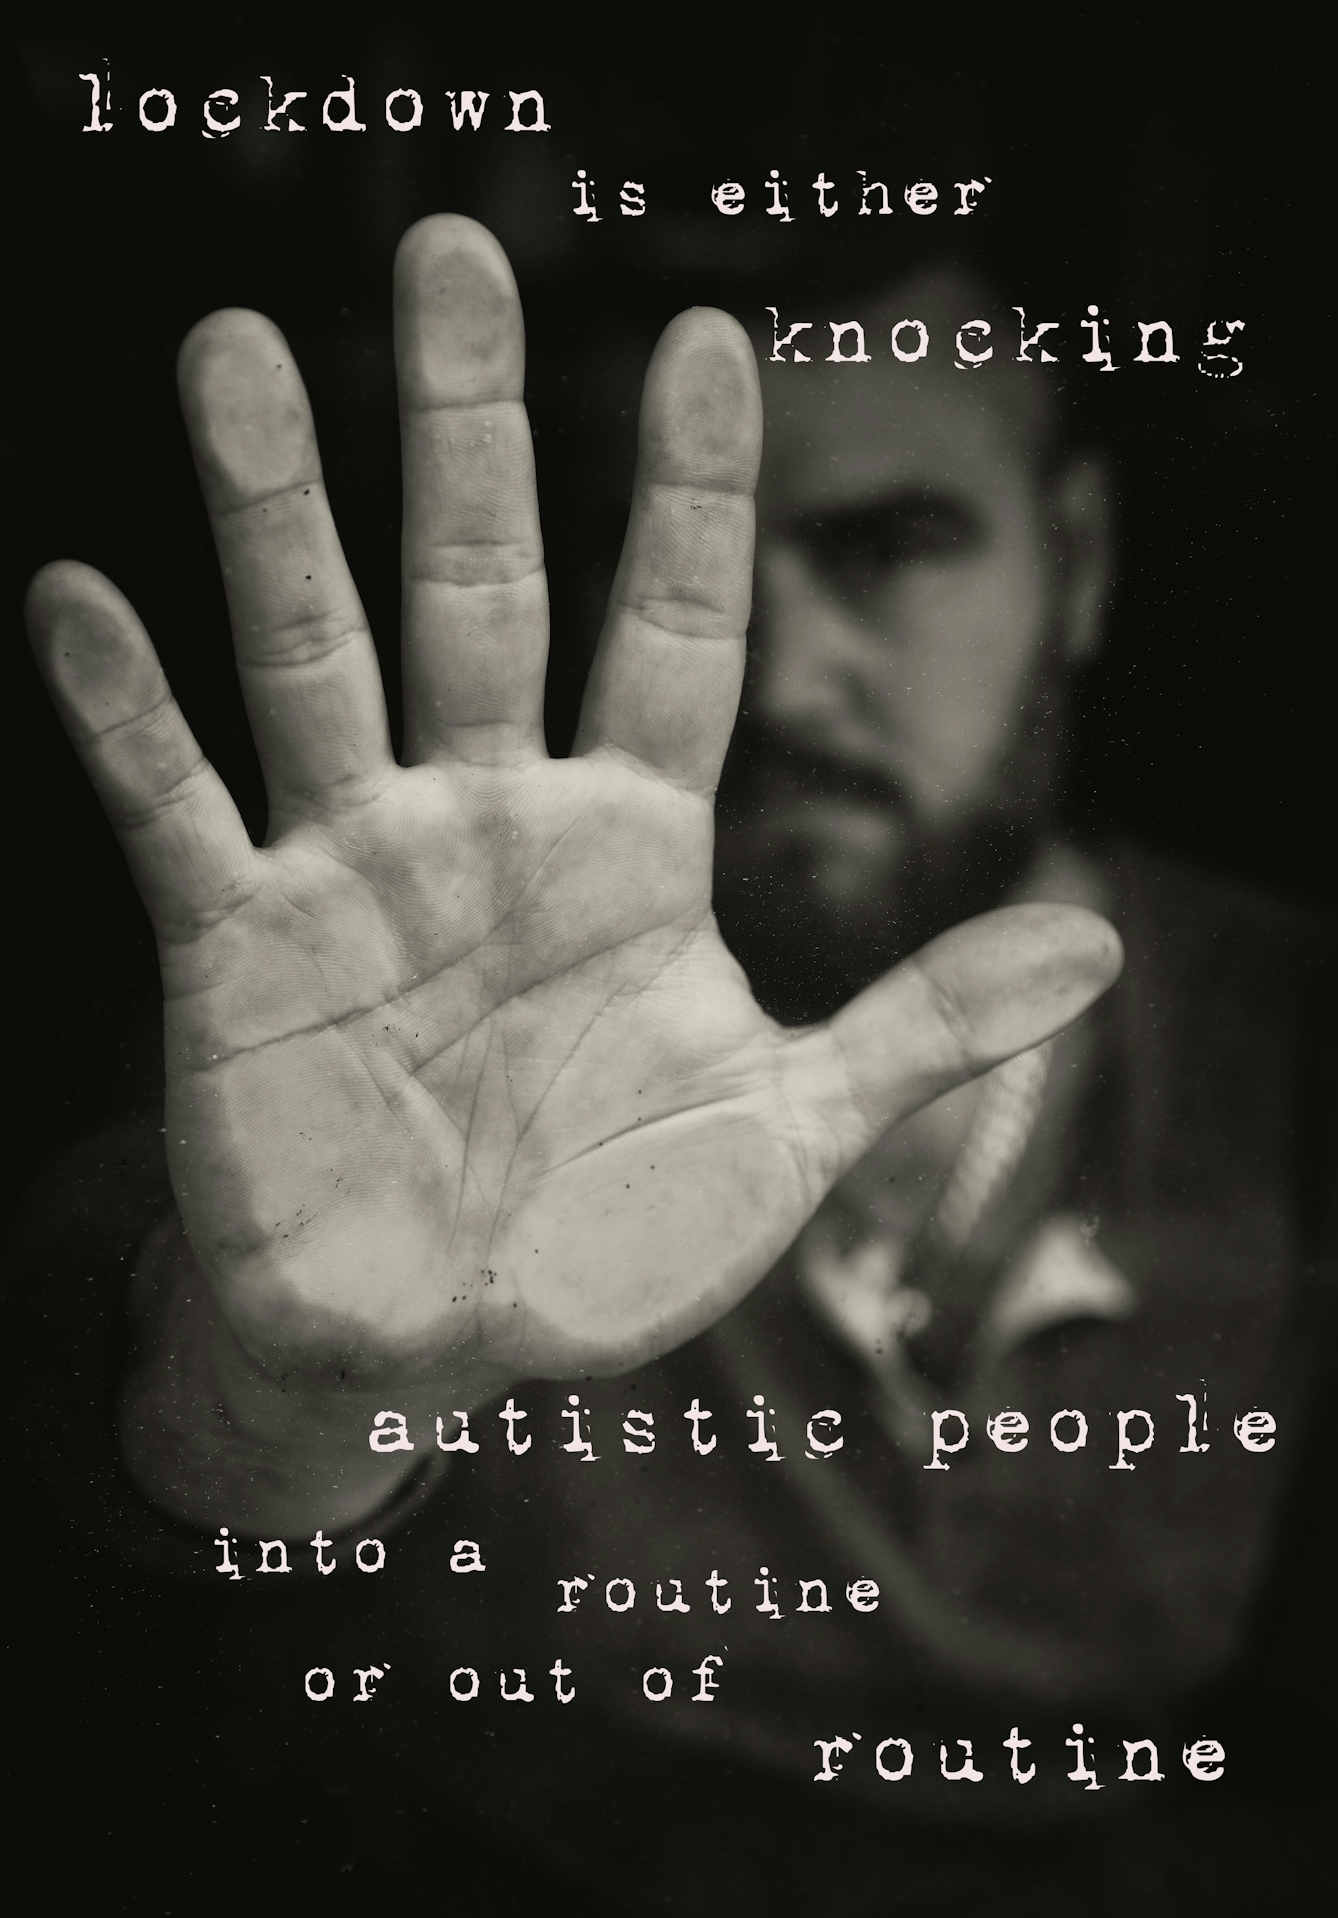 Photographic montage artwork showing a black and white image of the palm of an outstretched right hand of a man, pushed against a pane of glass. Behind the hand, in the distance and out of focus can been the seen the bearded face, arm and upper body of the man. Digitally montaged onto the image above the hand in a typewriter font are the words, "lockdown is either knocking" which continues below the hand, "autistic people into a routine or out of routine"